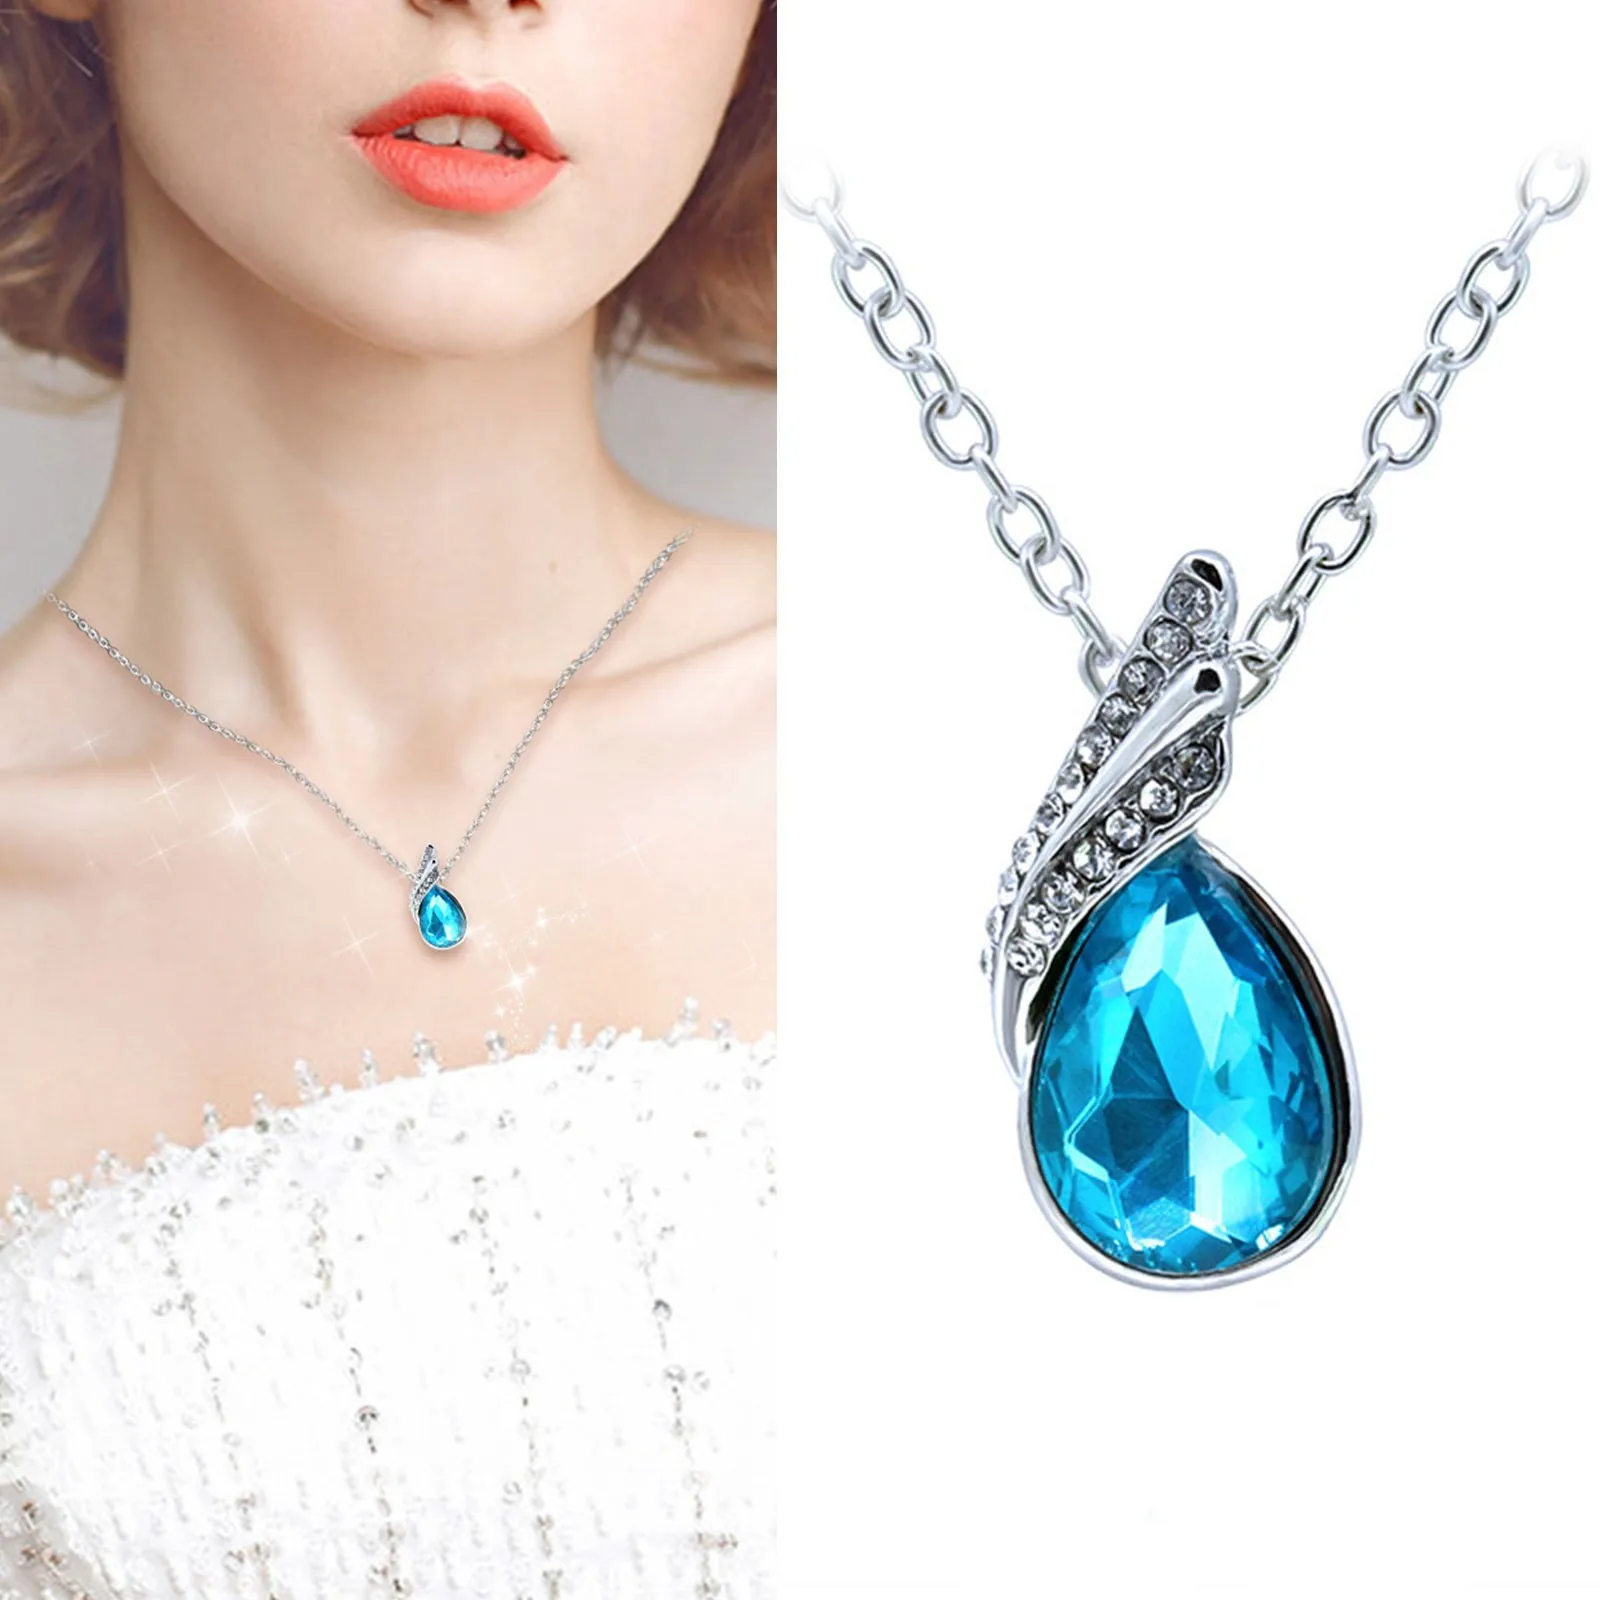 Crystal Necklace Diamond Leaf Clavicle Chain Accessory Pendant Alt Necklace Set Fake Necklace for Women Fake Chain Necklace